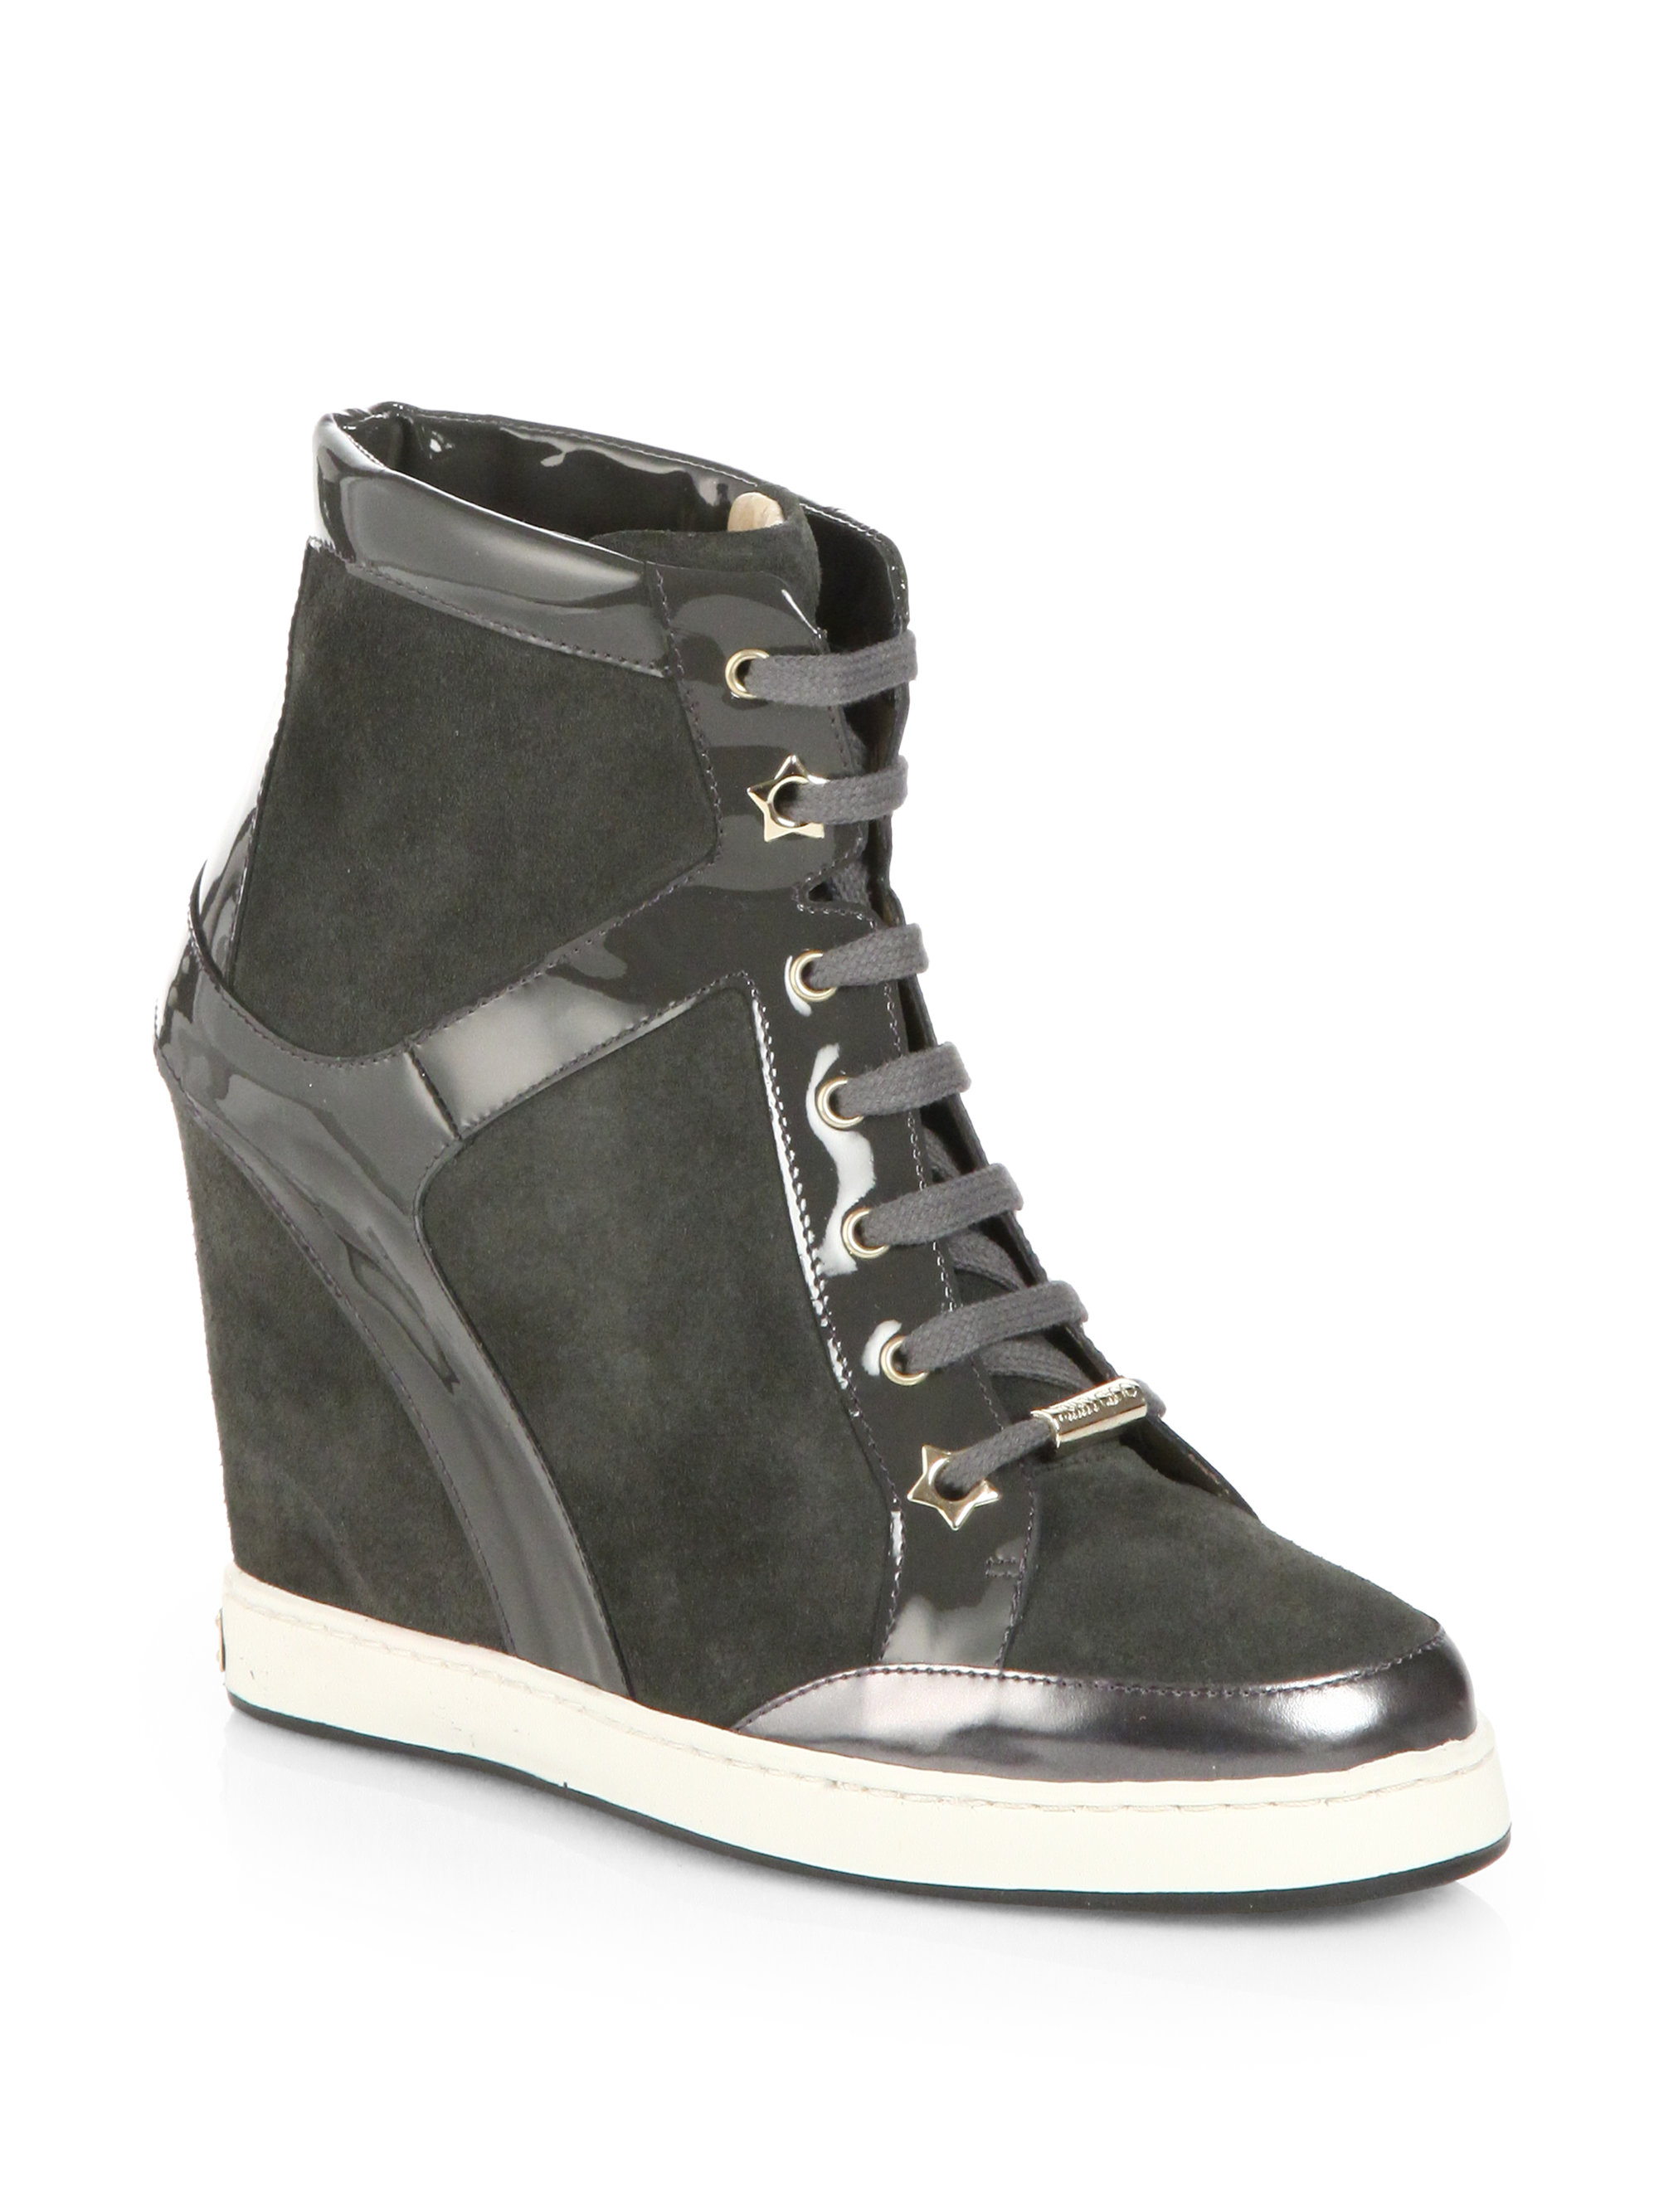 Lyst - Jimmy Choo Panama Suede Lace-Up Wedge Sneakers in Gray